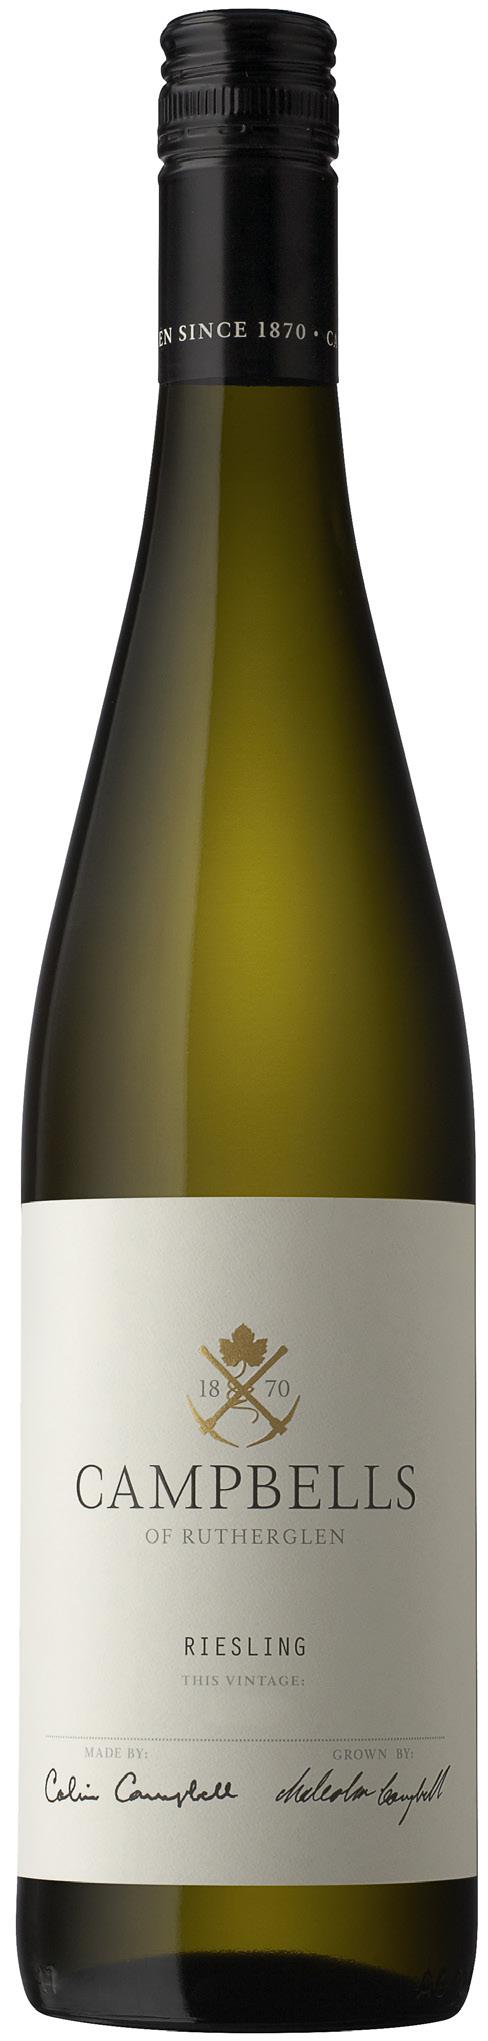 RIESLING 2018 We have been growing Riesling in our vineyards since the 1890 s and in that time have developed our own regional style, with abundant fruit flavours and wonderful balance.